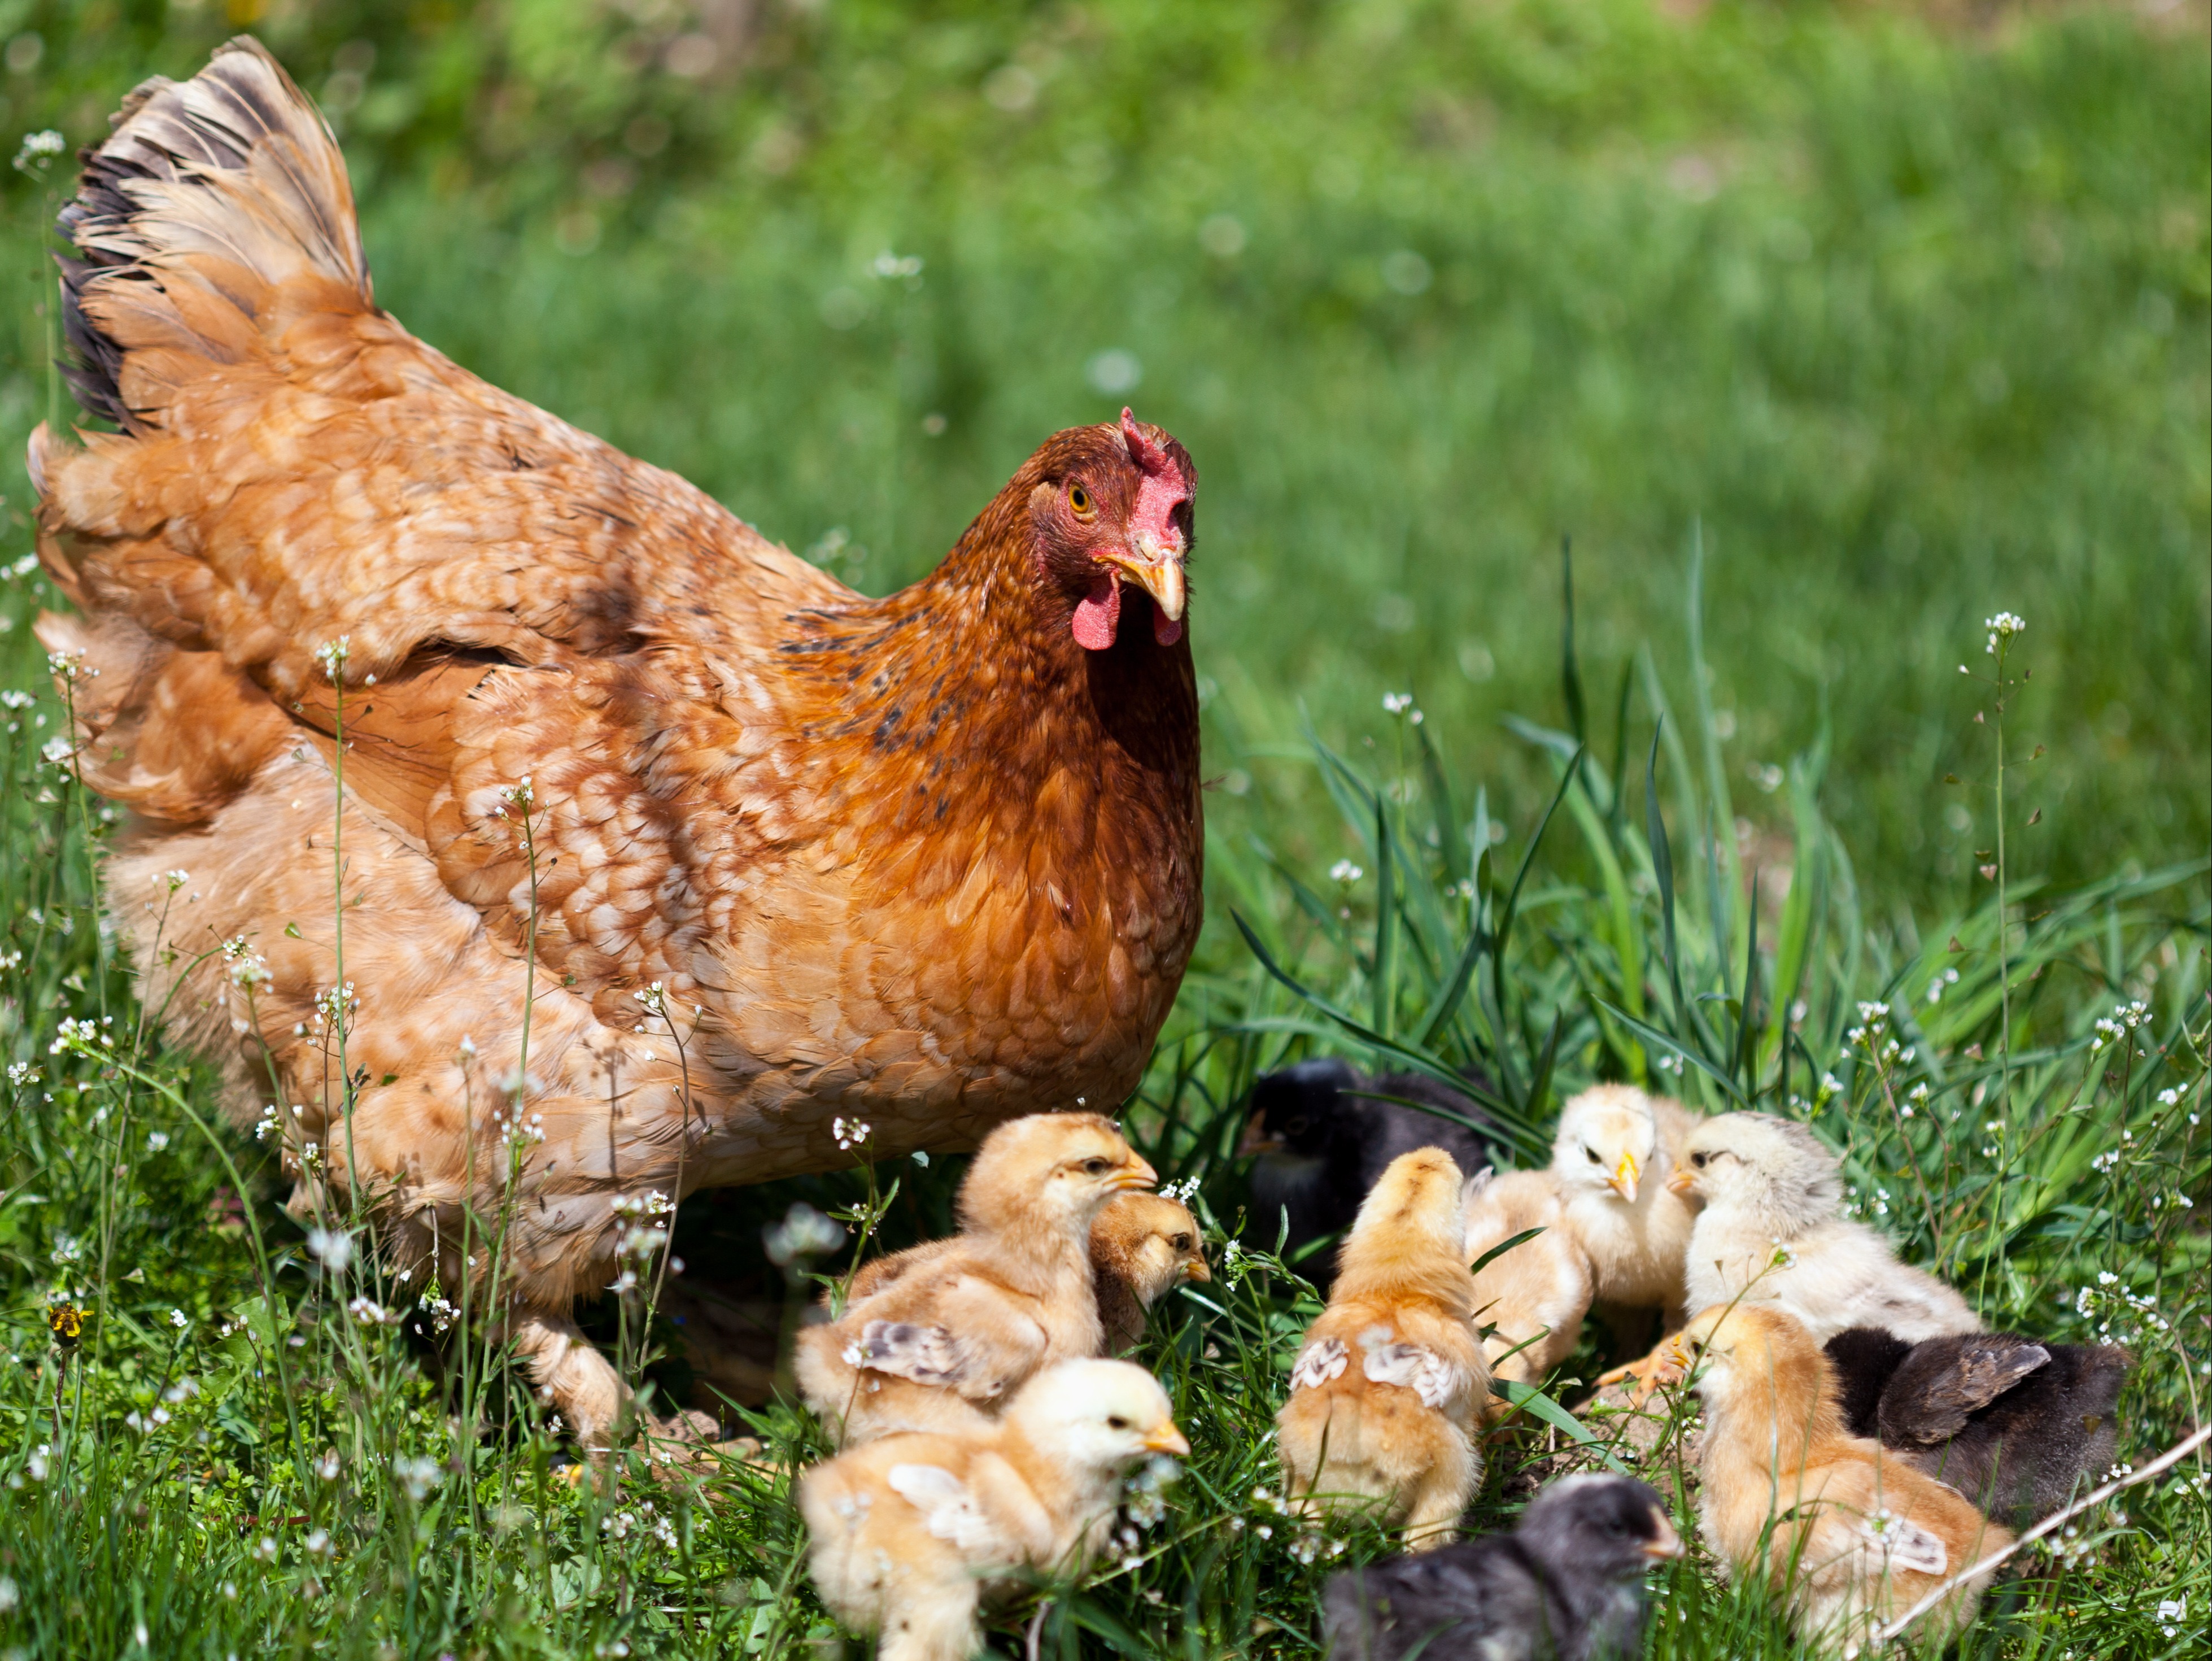 A mother hen with soft brown feathers stands protectively over her baby chi...